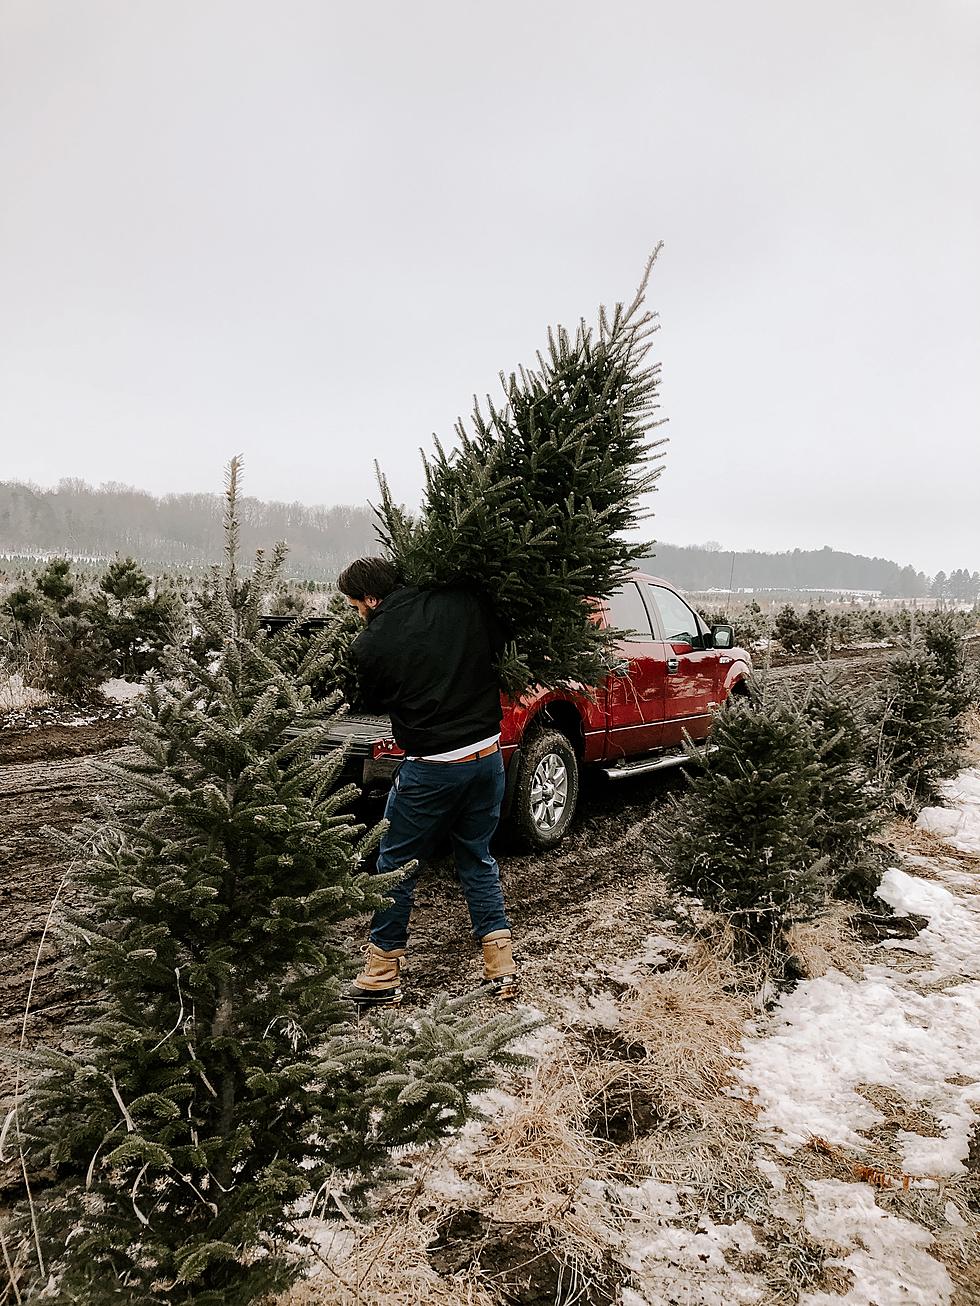 Want a Real Christmas Tree? These 5 Maine Farms Have You Covered